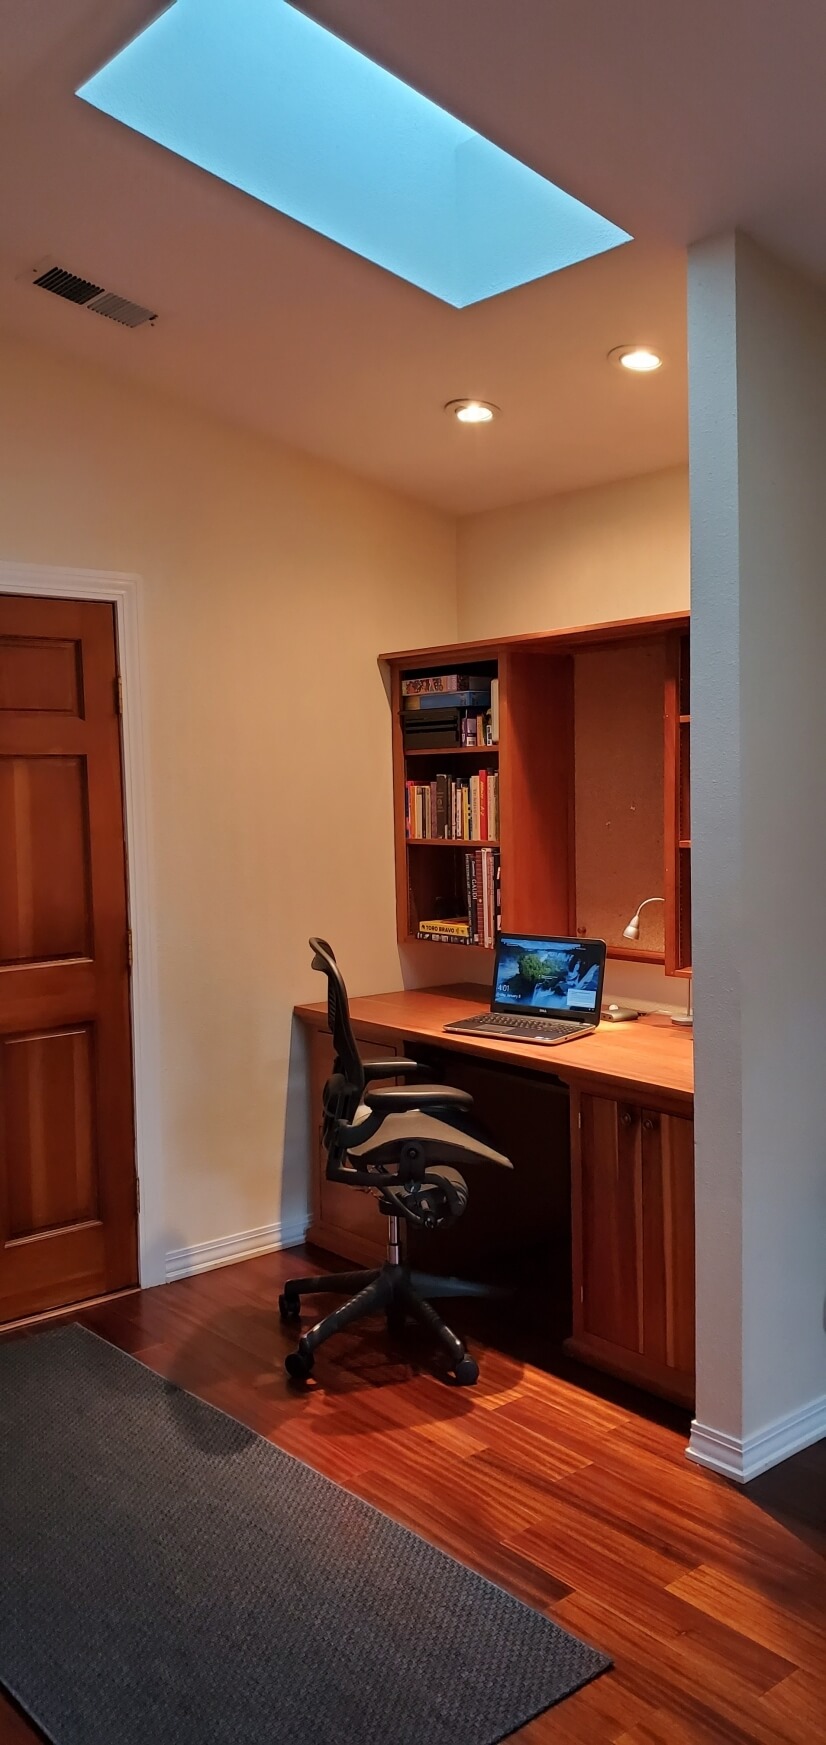 Built in desk with Aeron chair, Natural Light